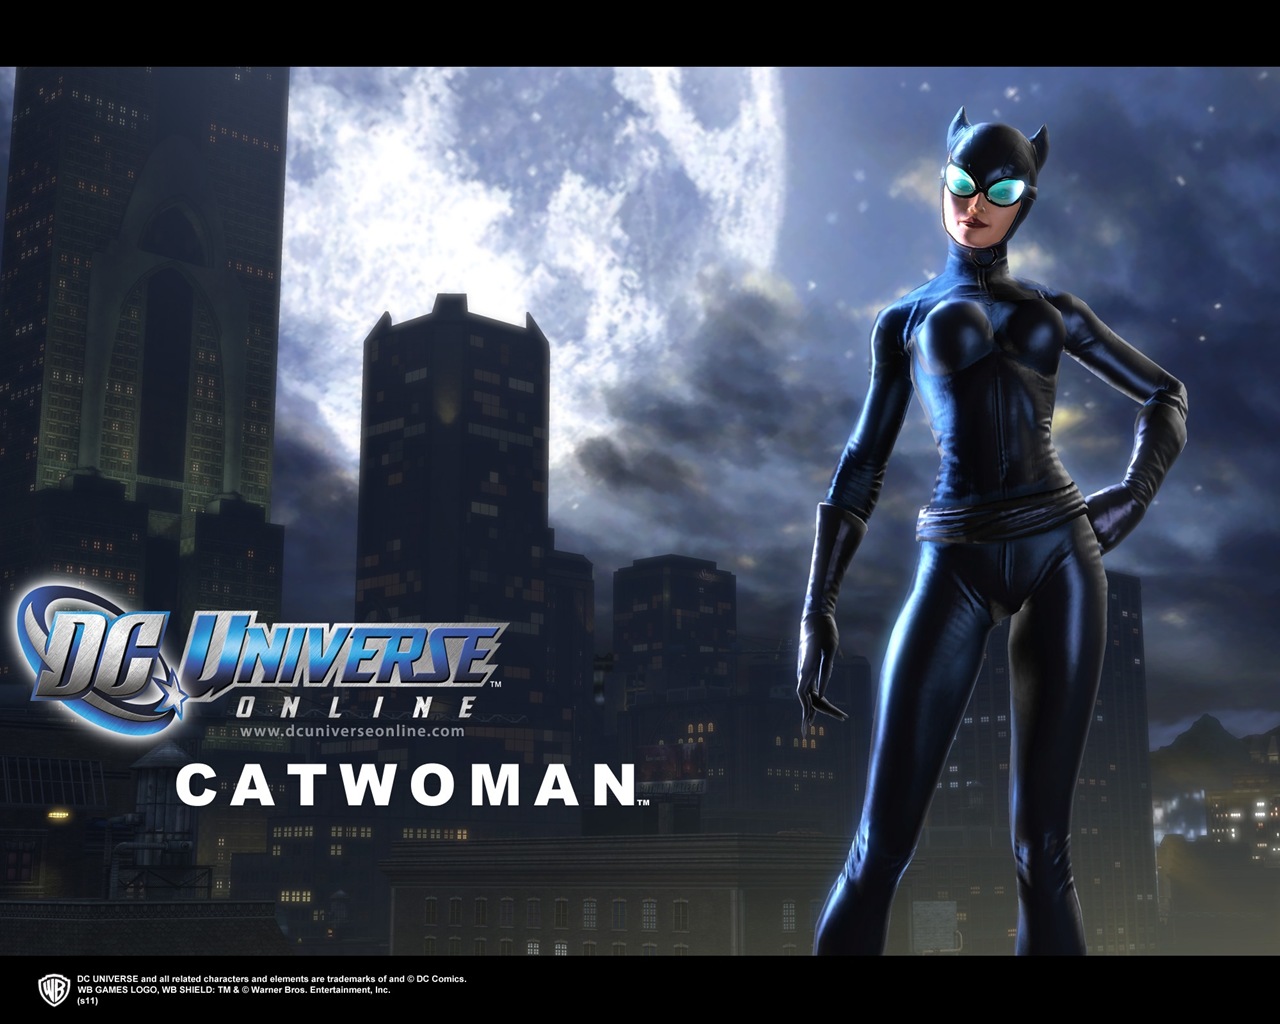 DC Universe Online HD game wallpapers #14 - 1280x1024